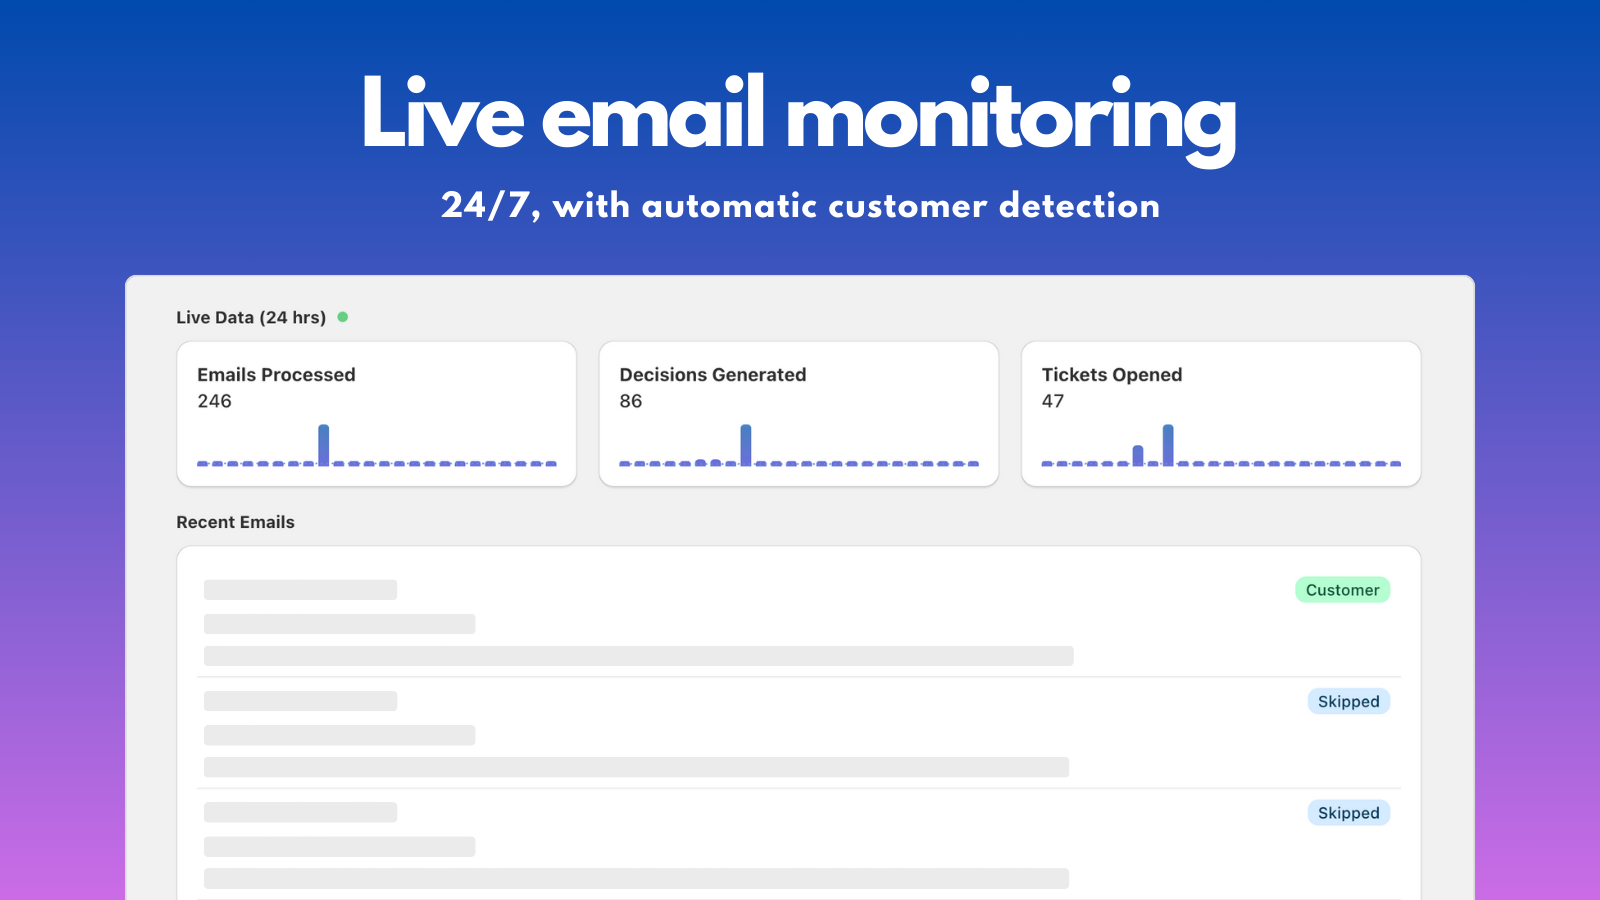 Live email monitoring